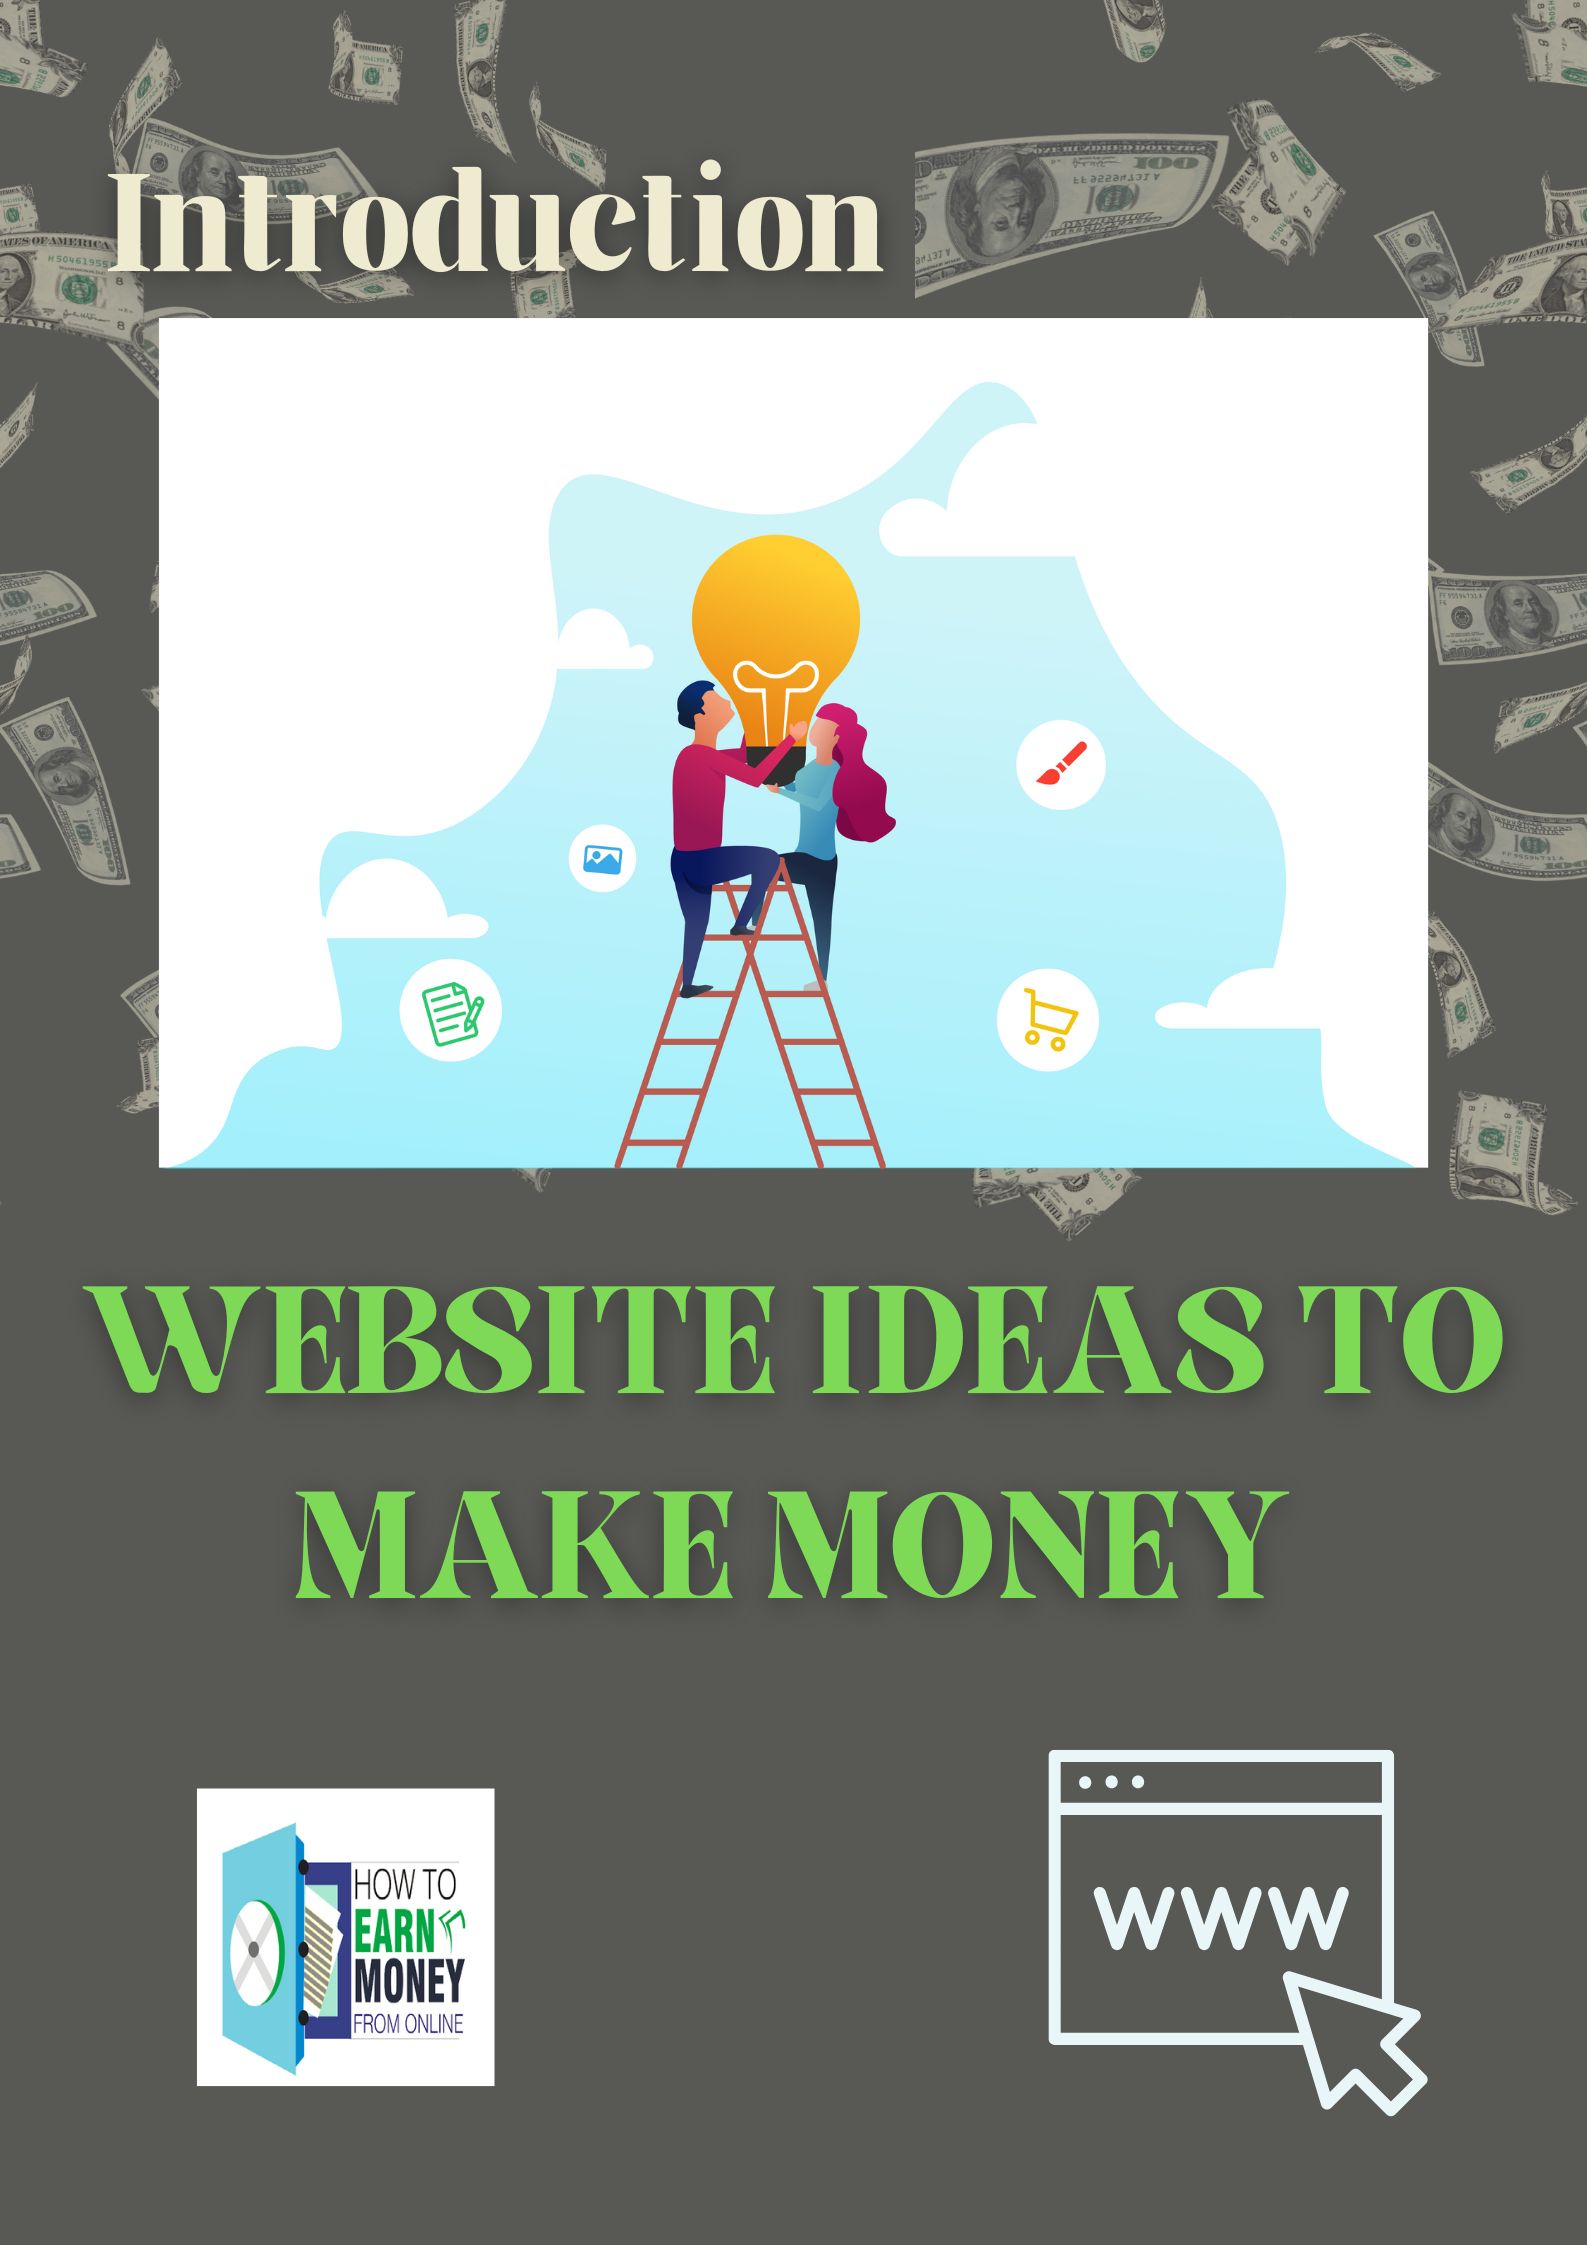 Introduction (Website ideas to make money)